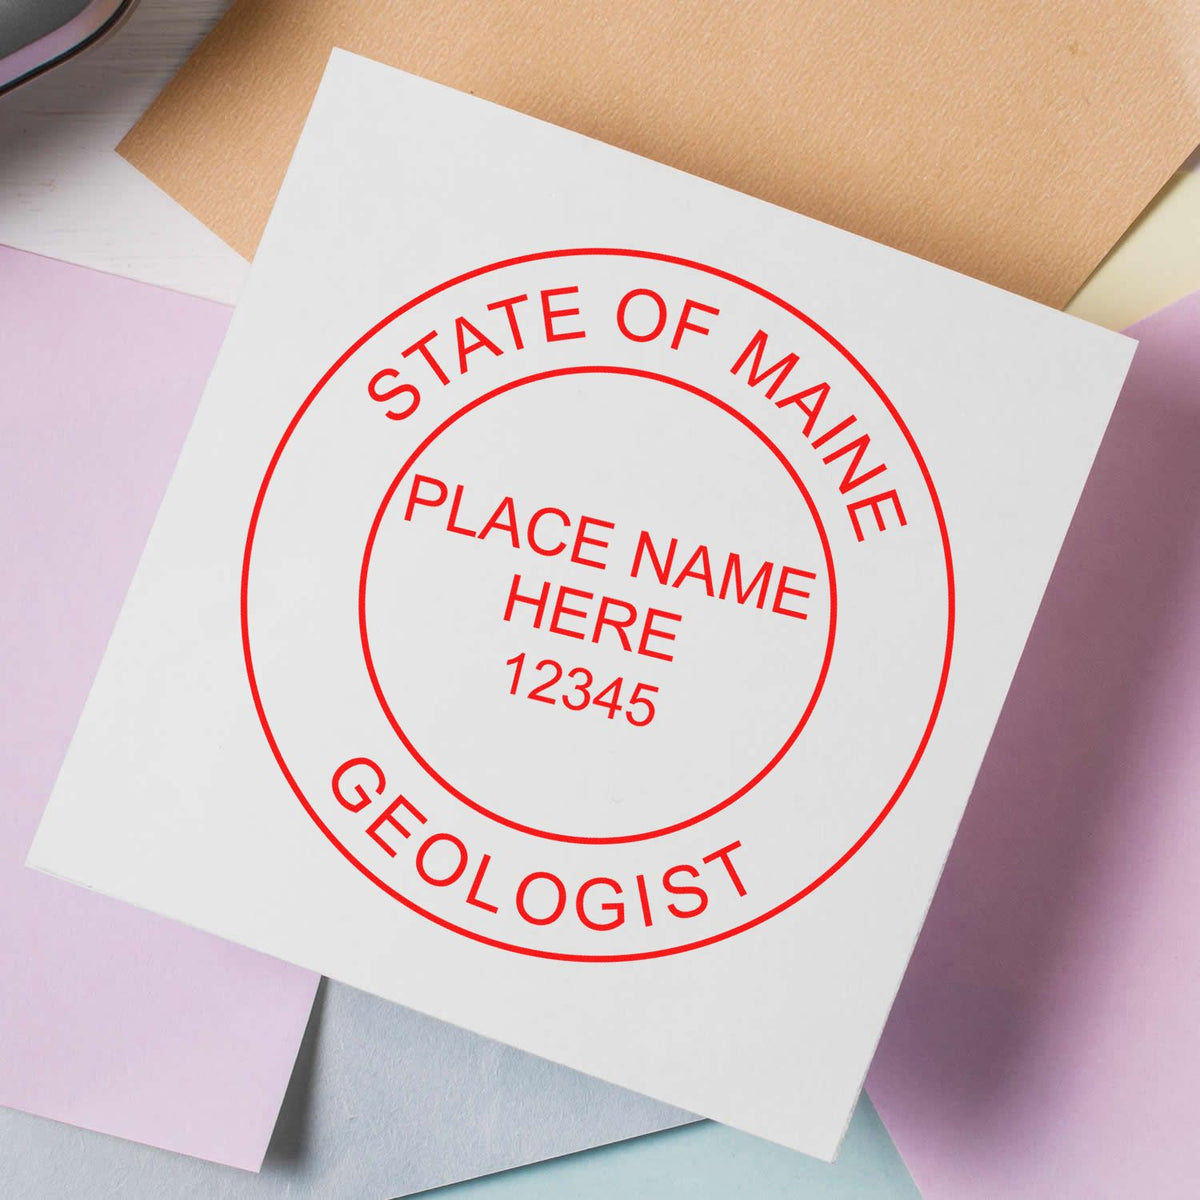 A photograph of the Self-Inking Maine Geologist Stamp stamp impression reveals a vivid, professional image of the on paper.